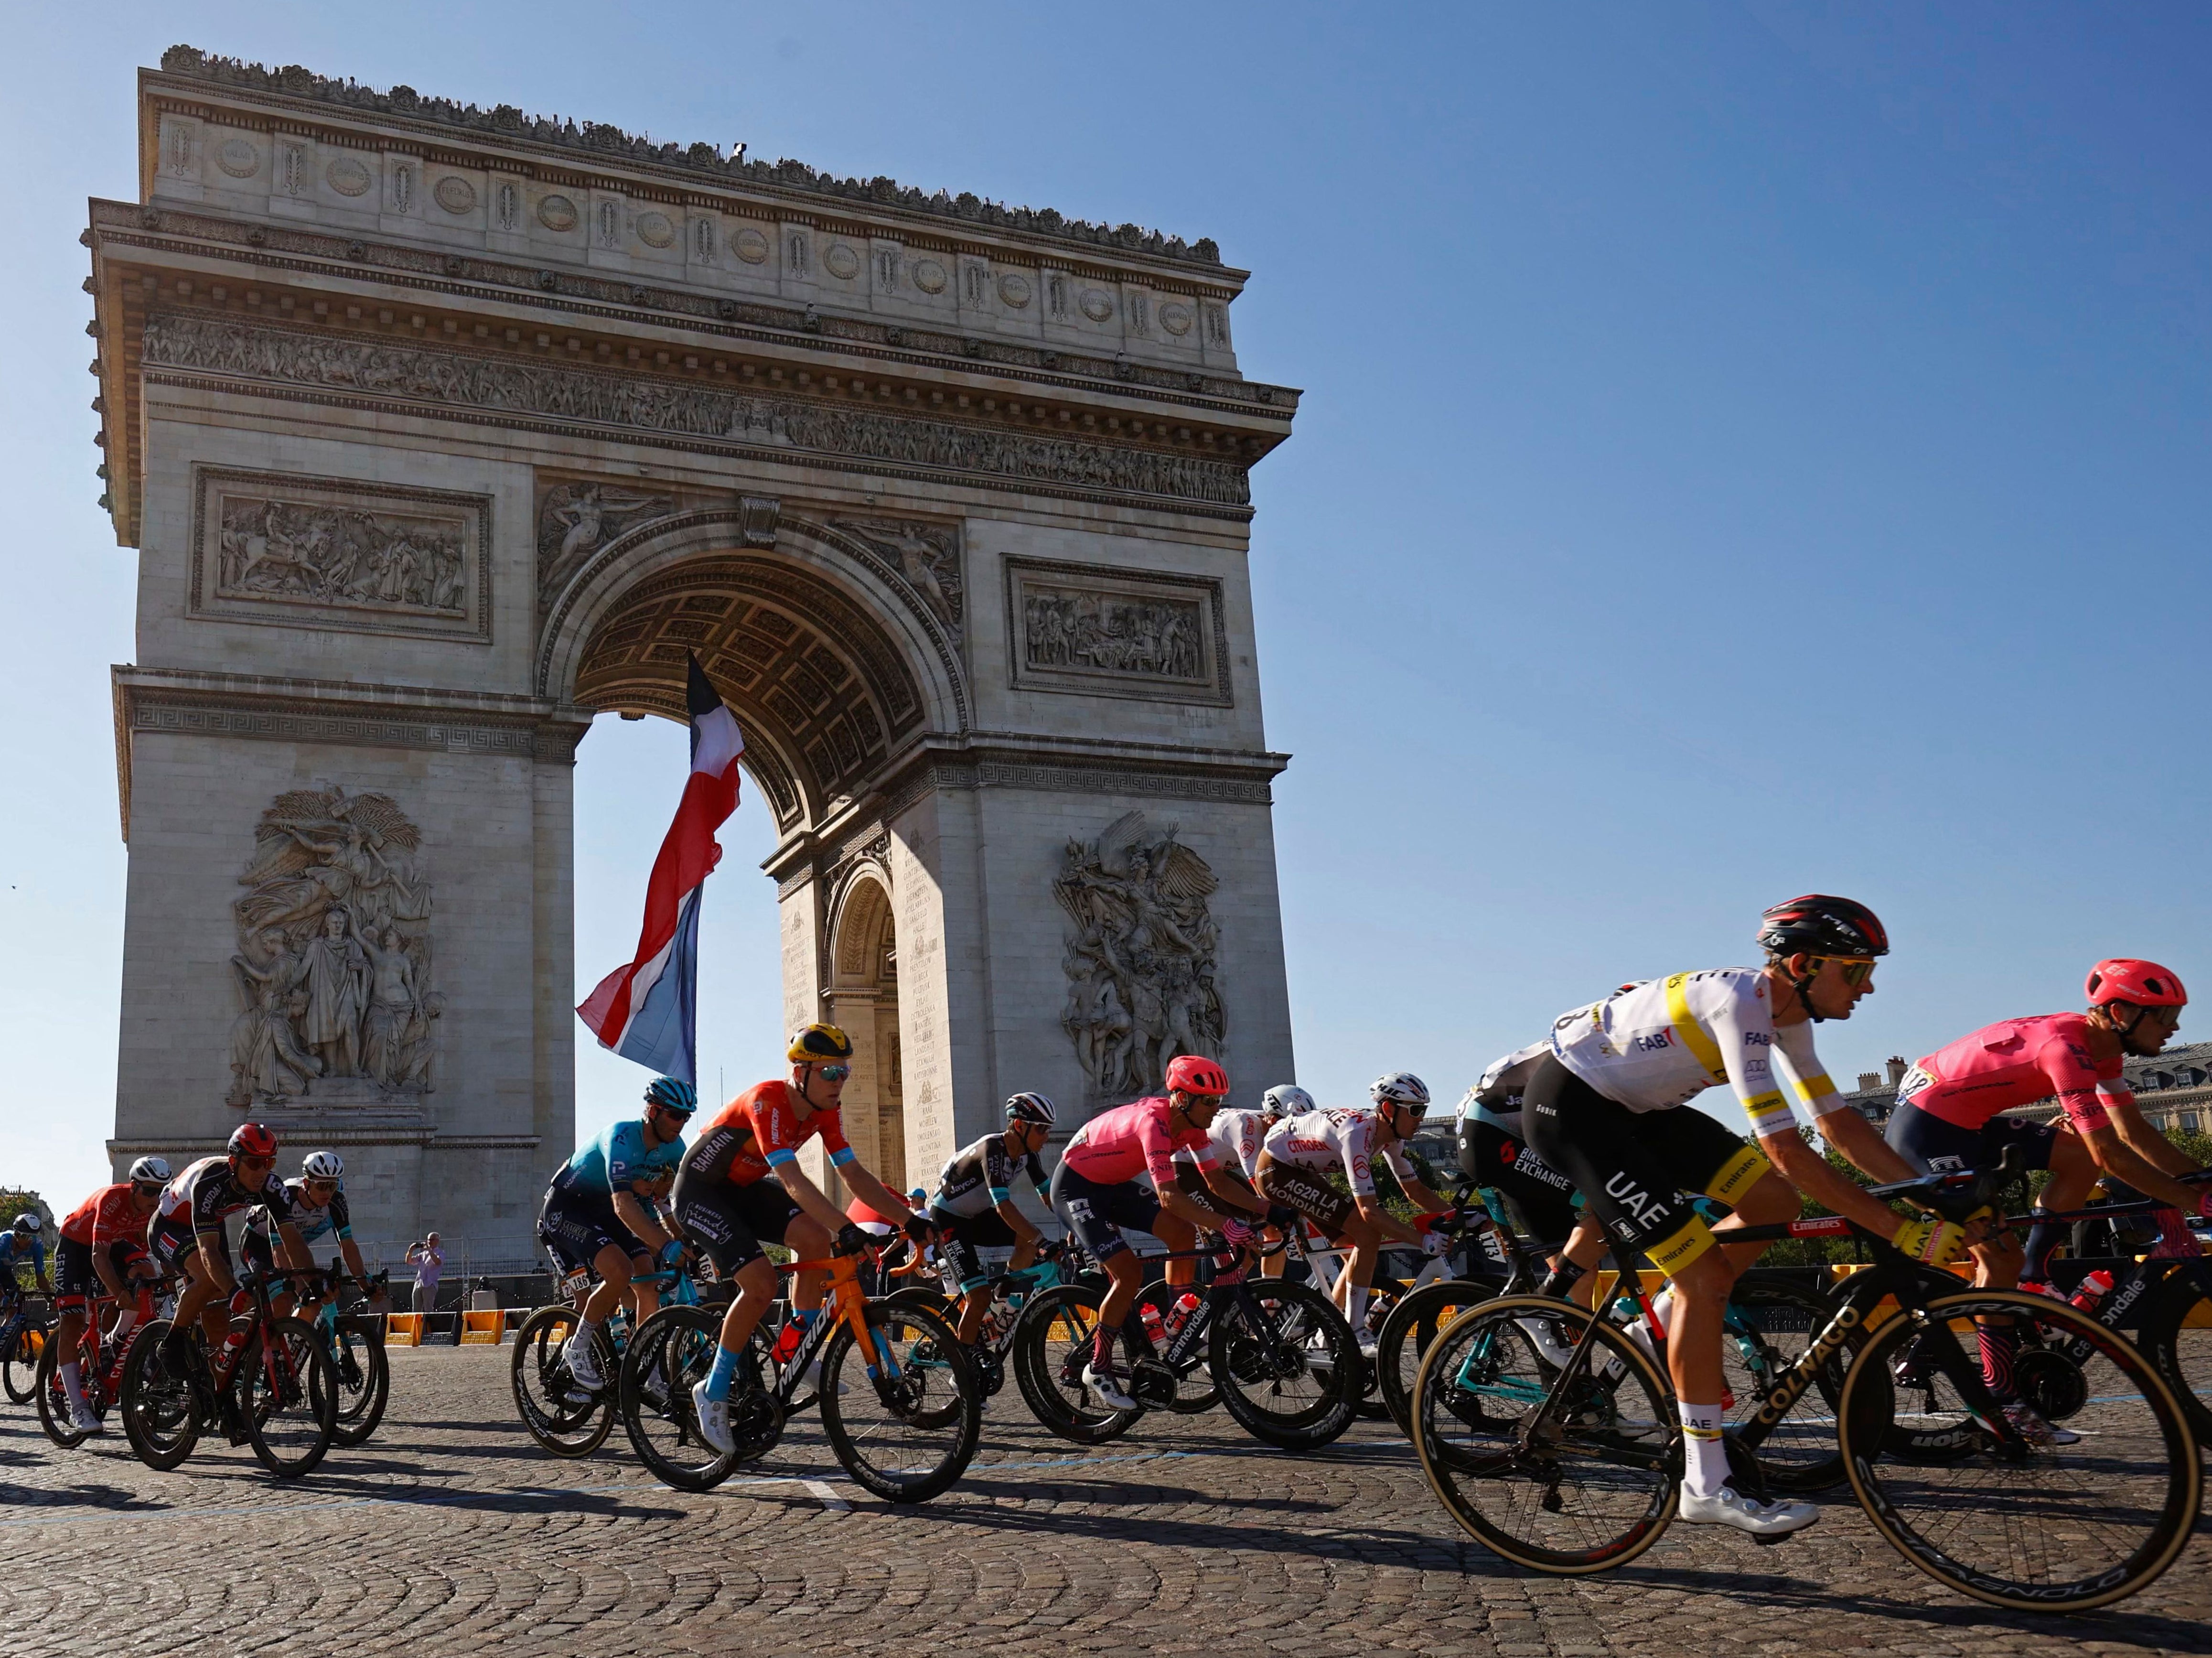 The Tour de France is the most famous race on the cycling calendar